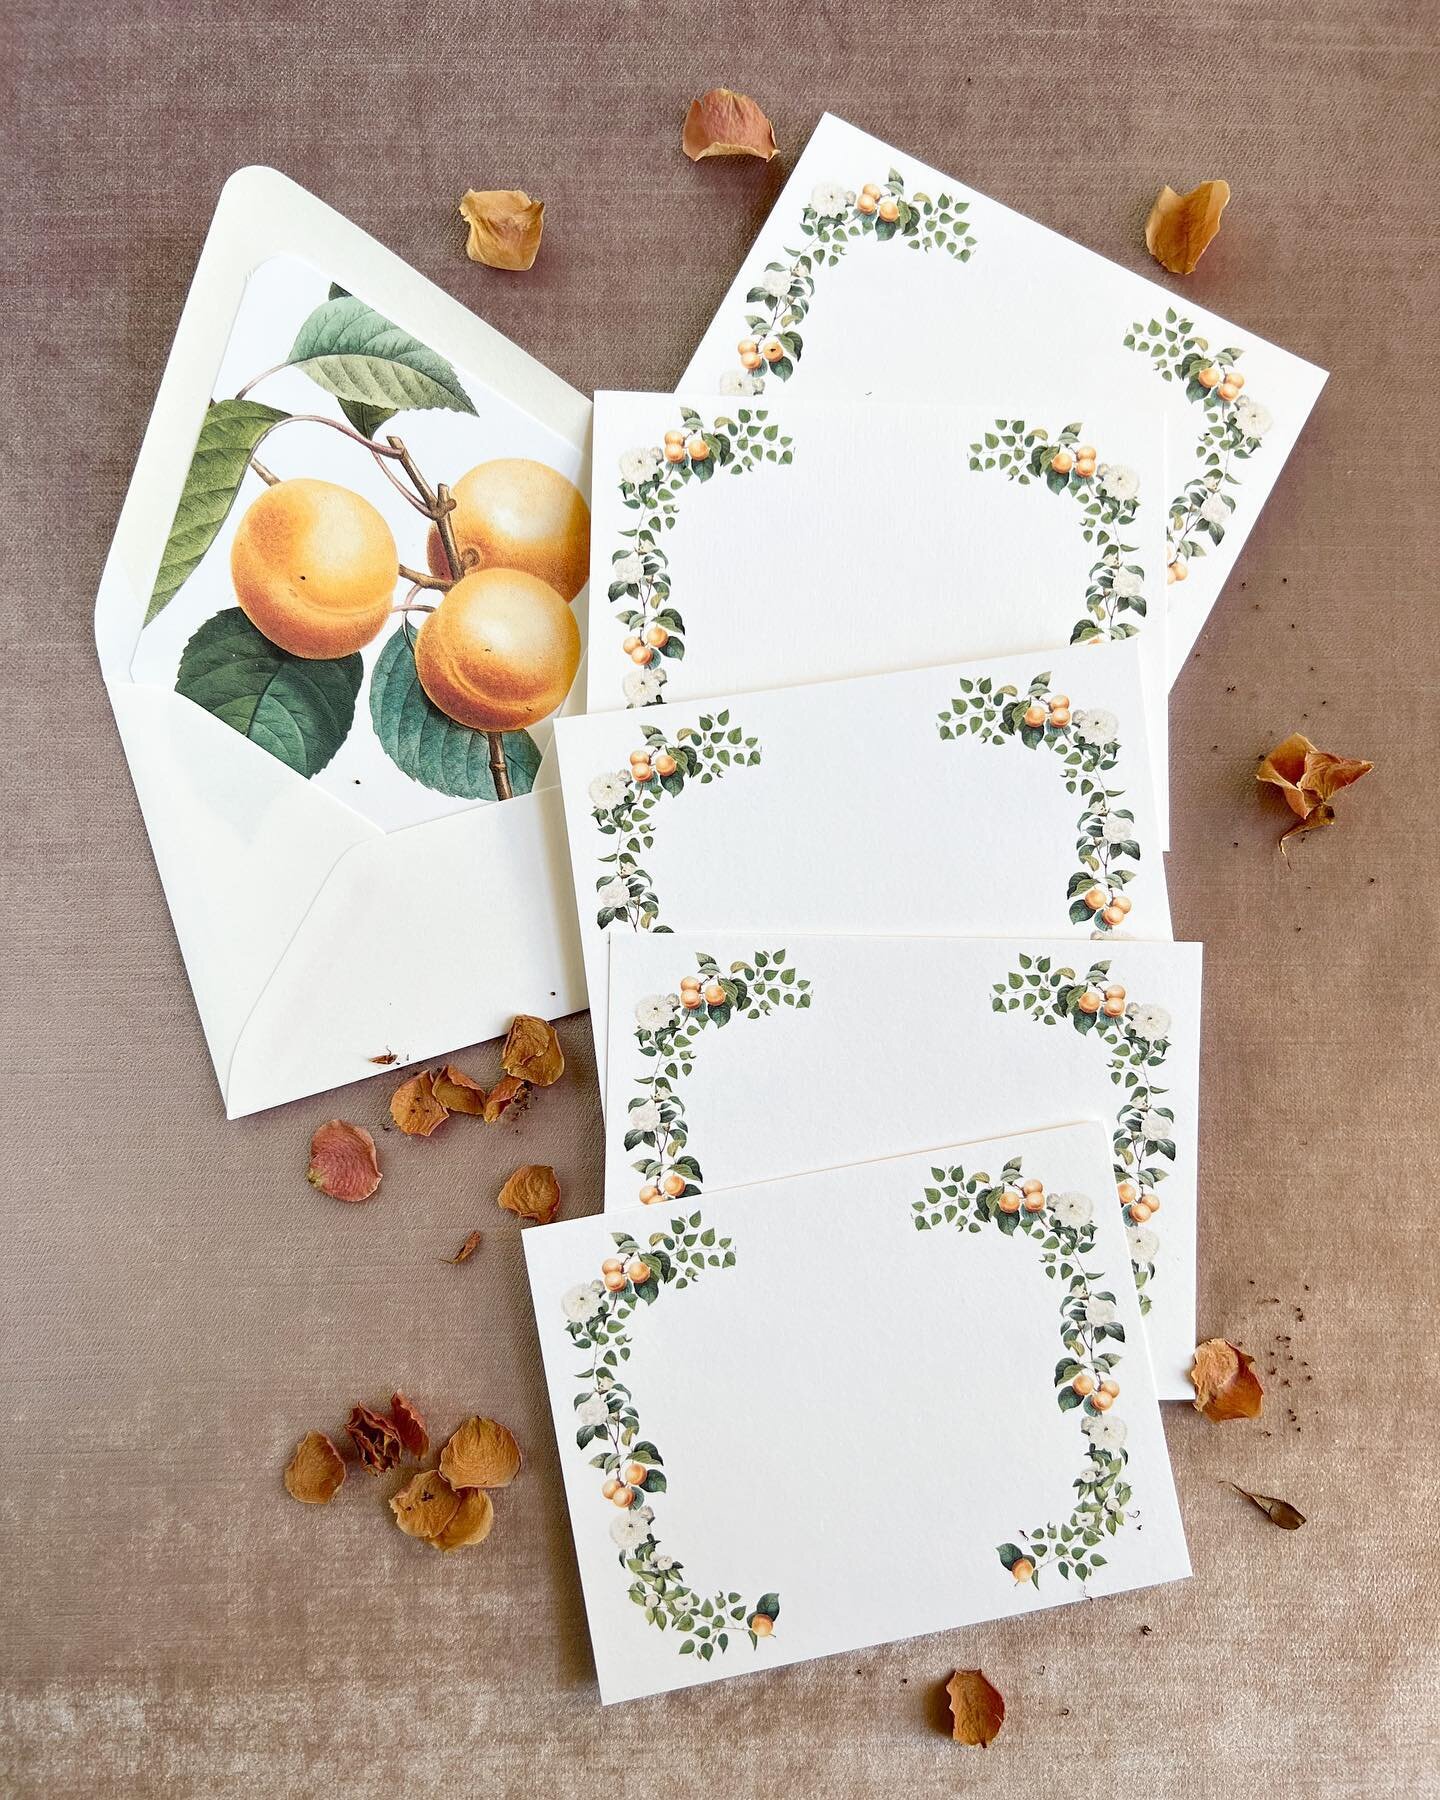 Introducing our new stationery sets &lt;🍊&gt; 14 new designs and vintage liners all ready to ship to you! Check out our website to see the full collection and get 15% off to celebrate! Code: NEWSTATIONERY